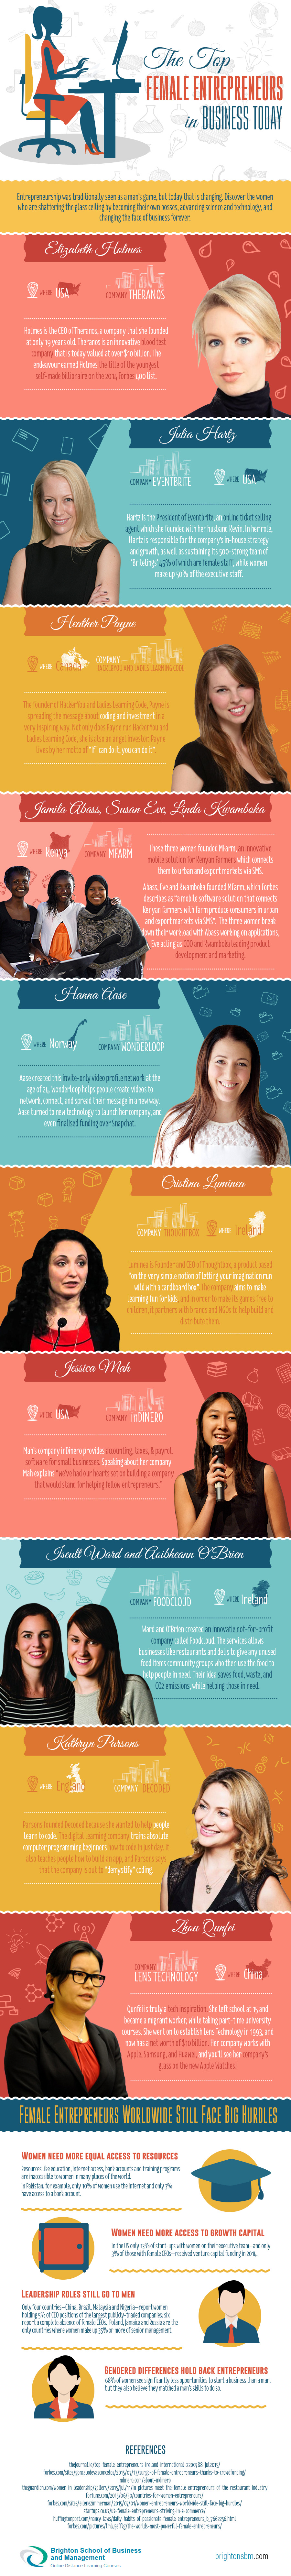 Top-Female-Entrepreneurs-in-Business-Today-Infographic